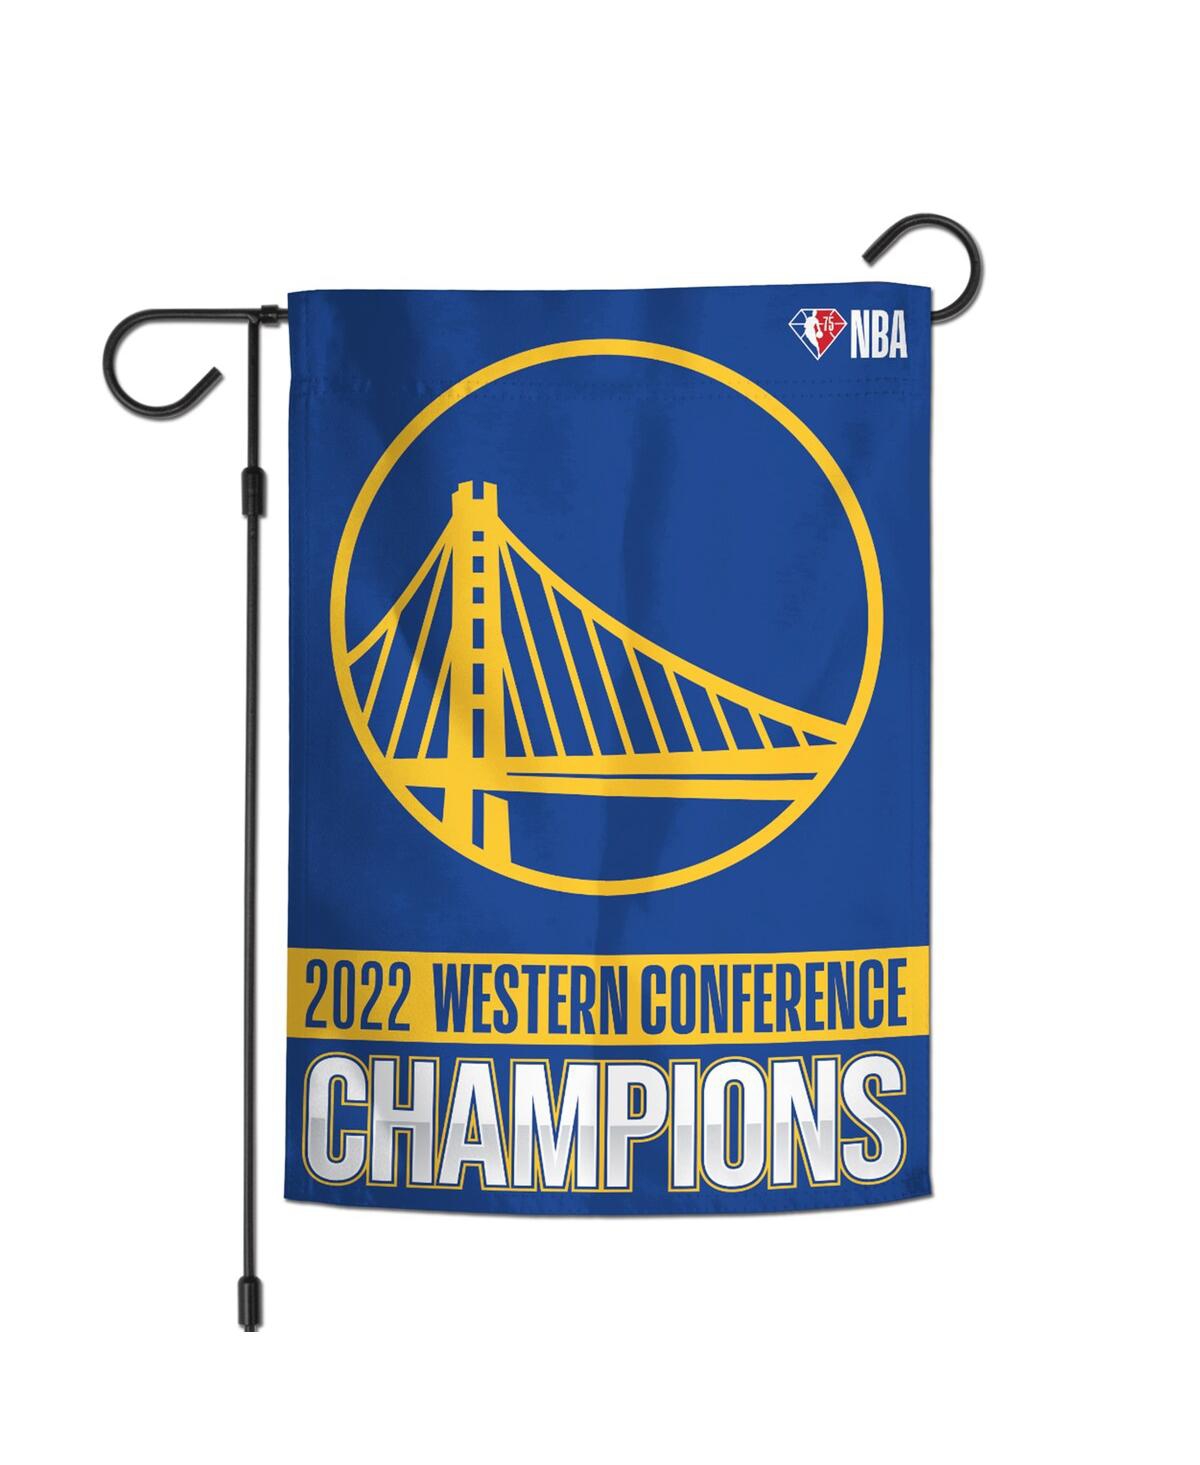 Golden State Warriors 2022 Western Conference Champions 12'' x 18'' Double-Sided Garden Flag - Blue